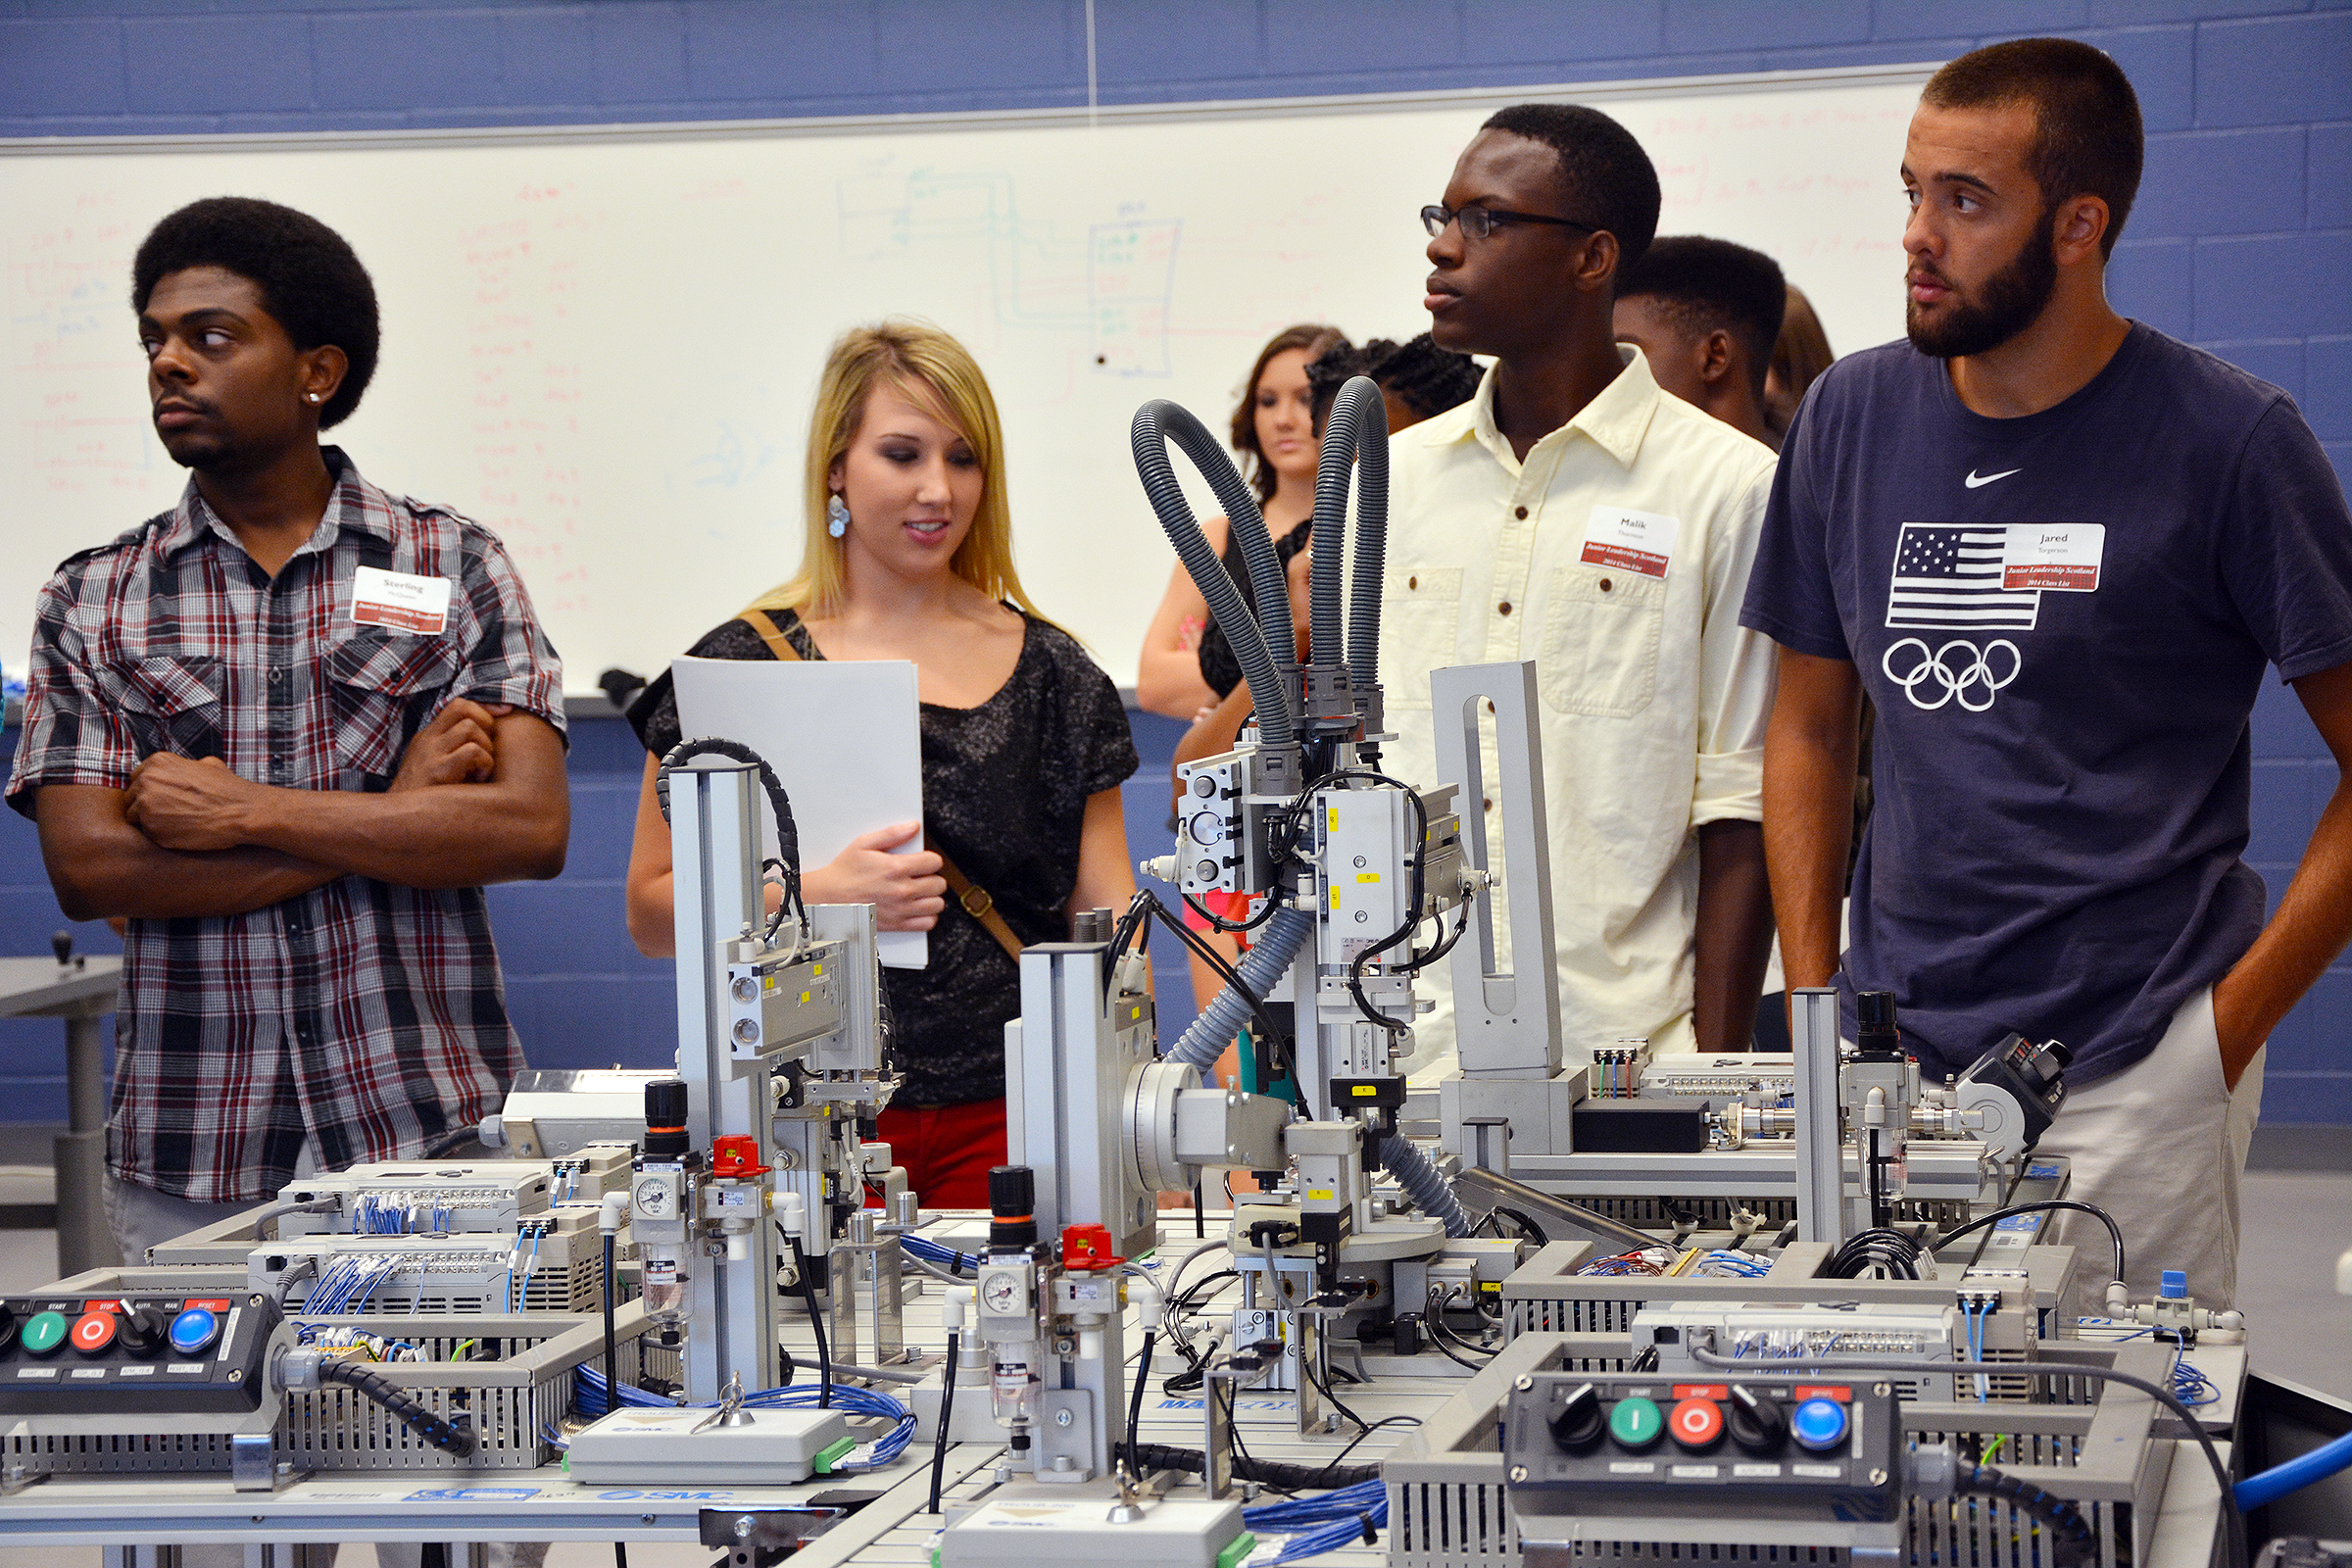 Scotland Junior Leadership students take a tour of the Automation Lab where Mechatronics Engineering is taught at Richmond Community College. This program draws from five areas of engineering, including electrical and electronics, automation and robotics, instrumentation and controls, electromechanical systems and industrial systems